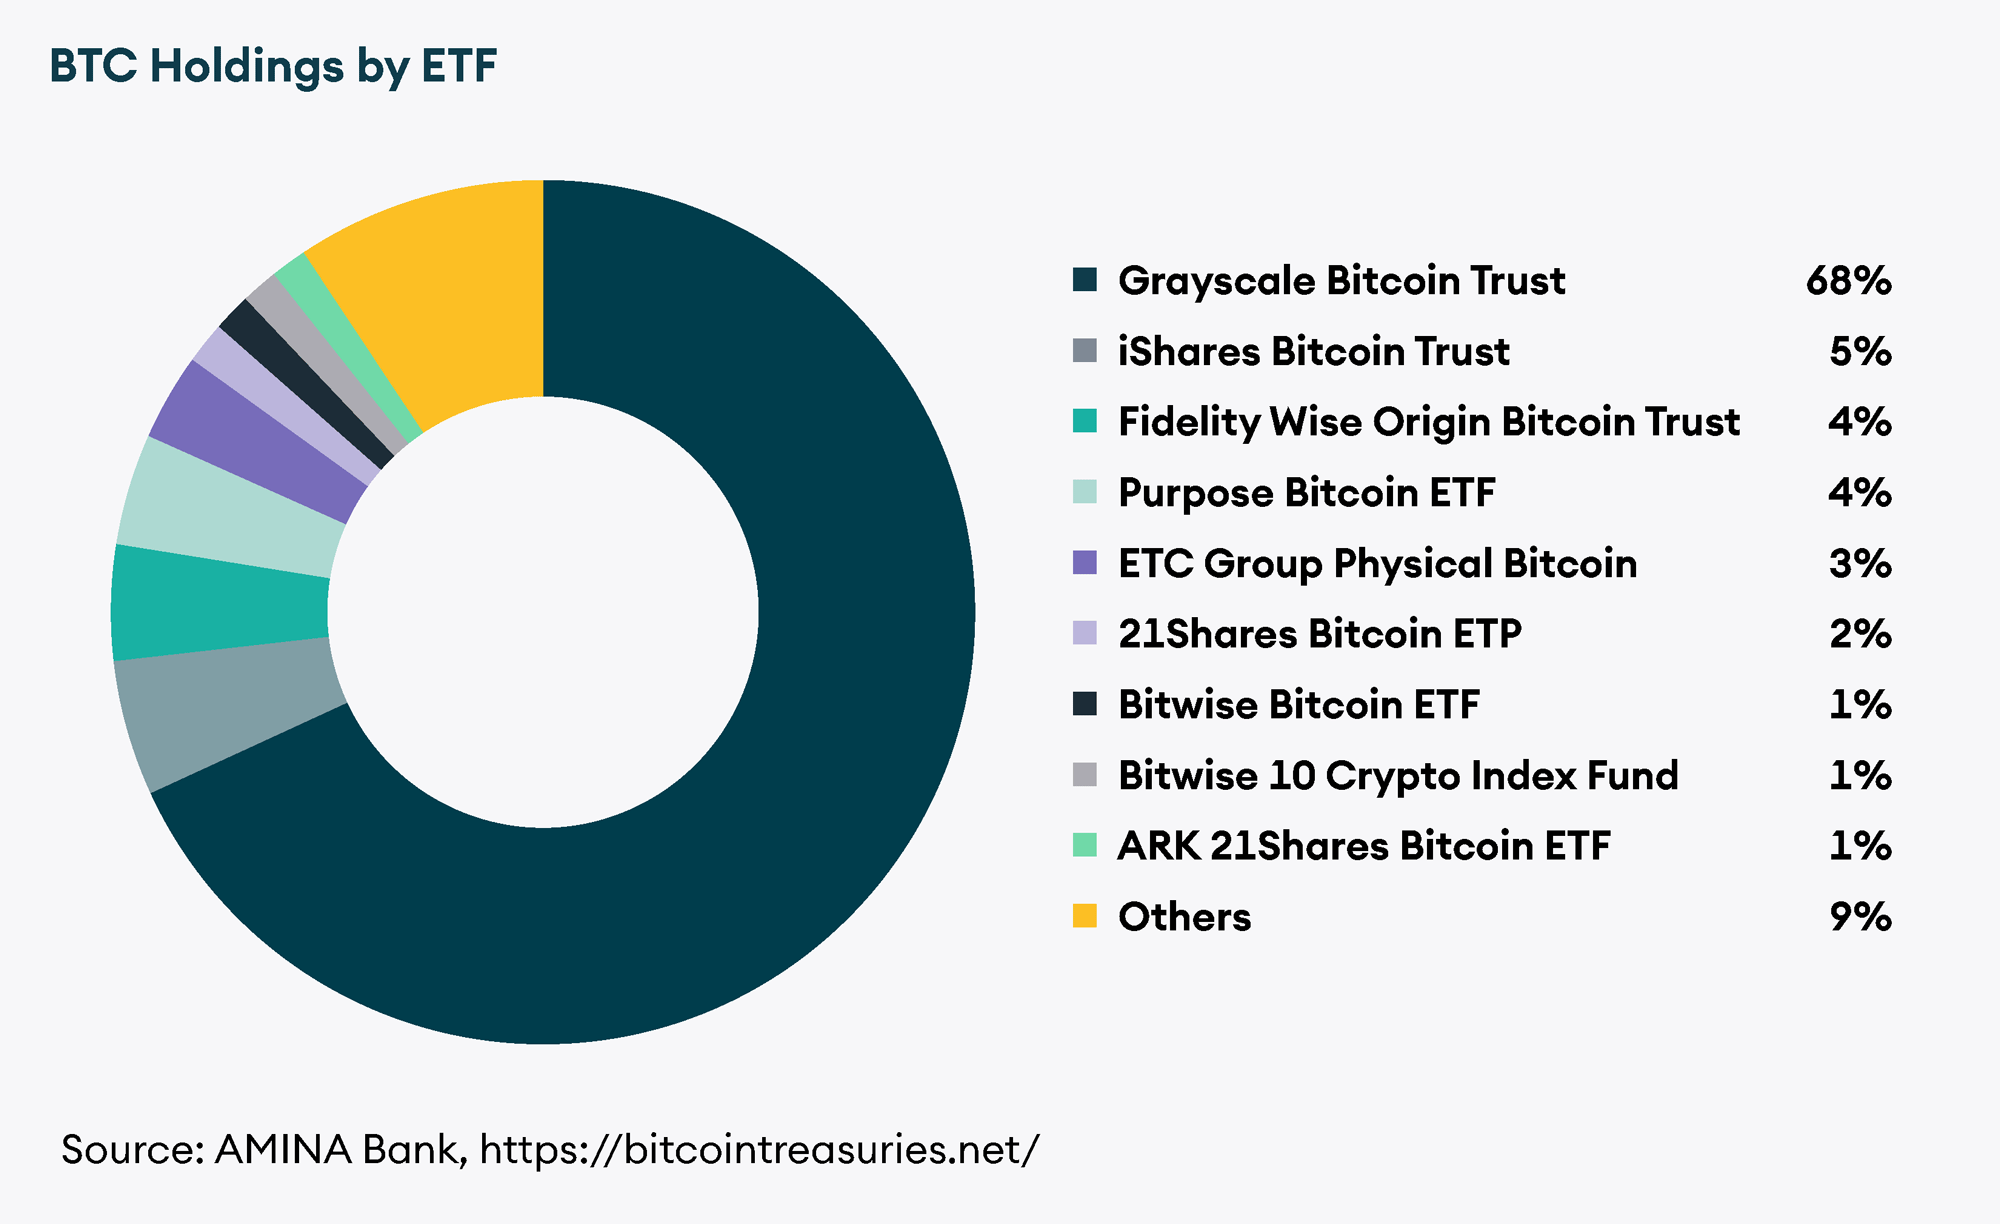 Bitcoin Holdings by ETF